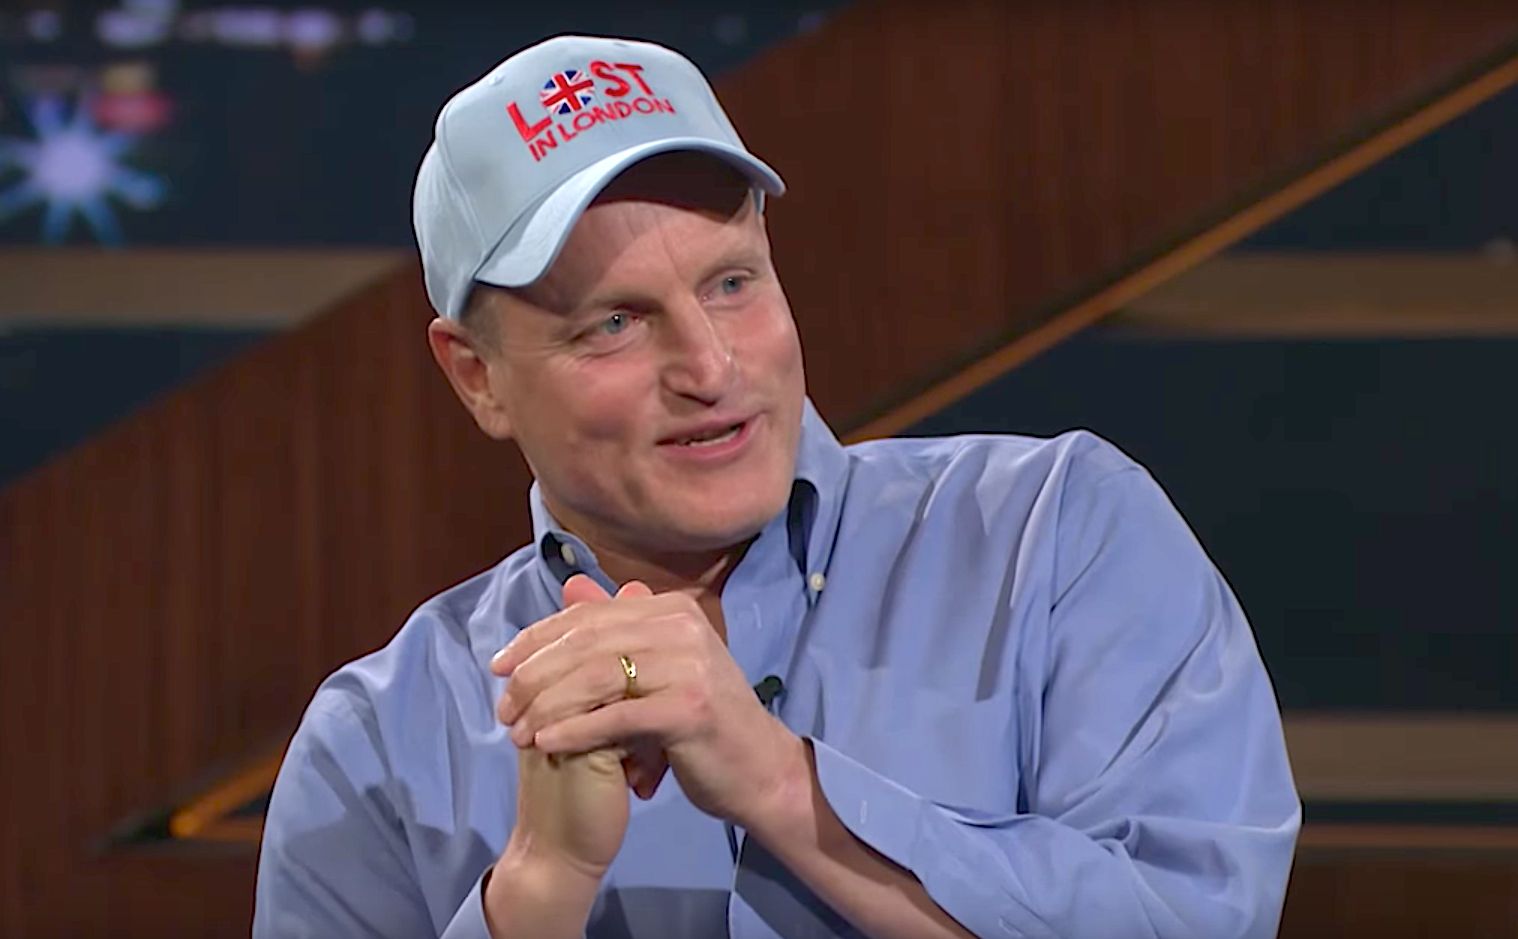 Woody Harrelson's Dinner Date With Donald Trump Did Not Go Well